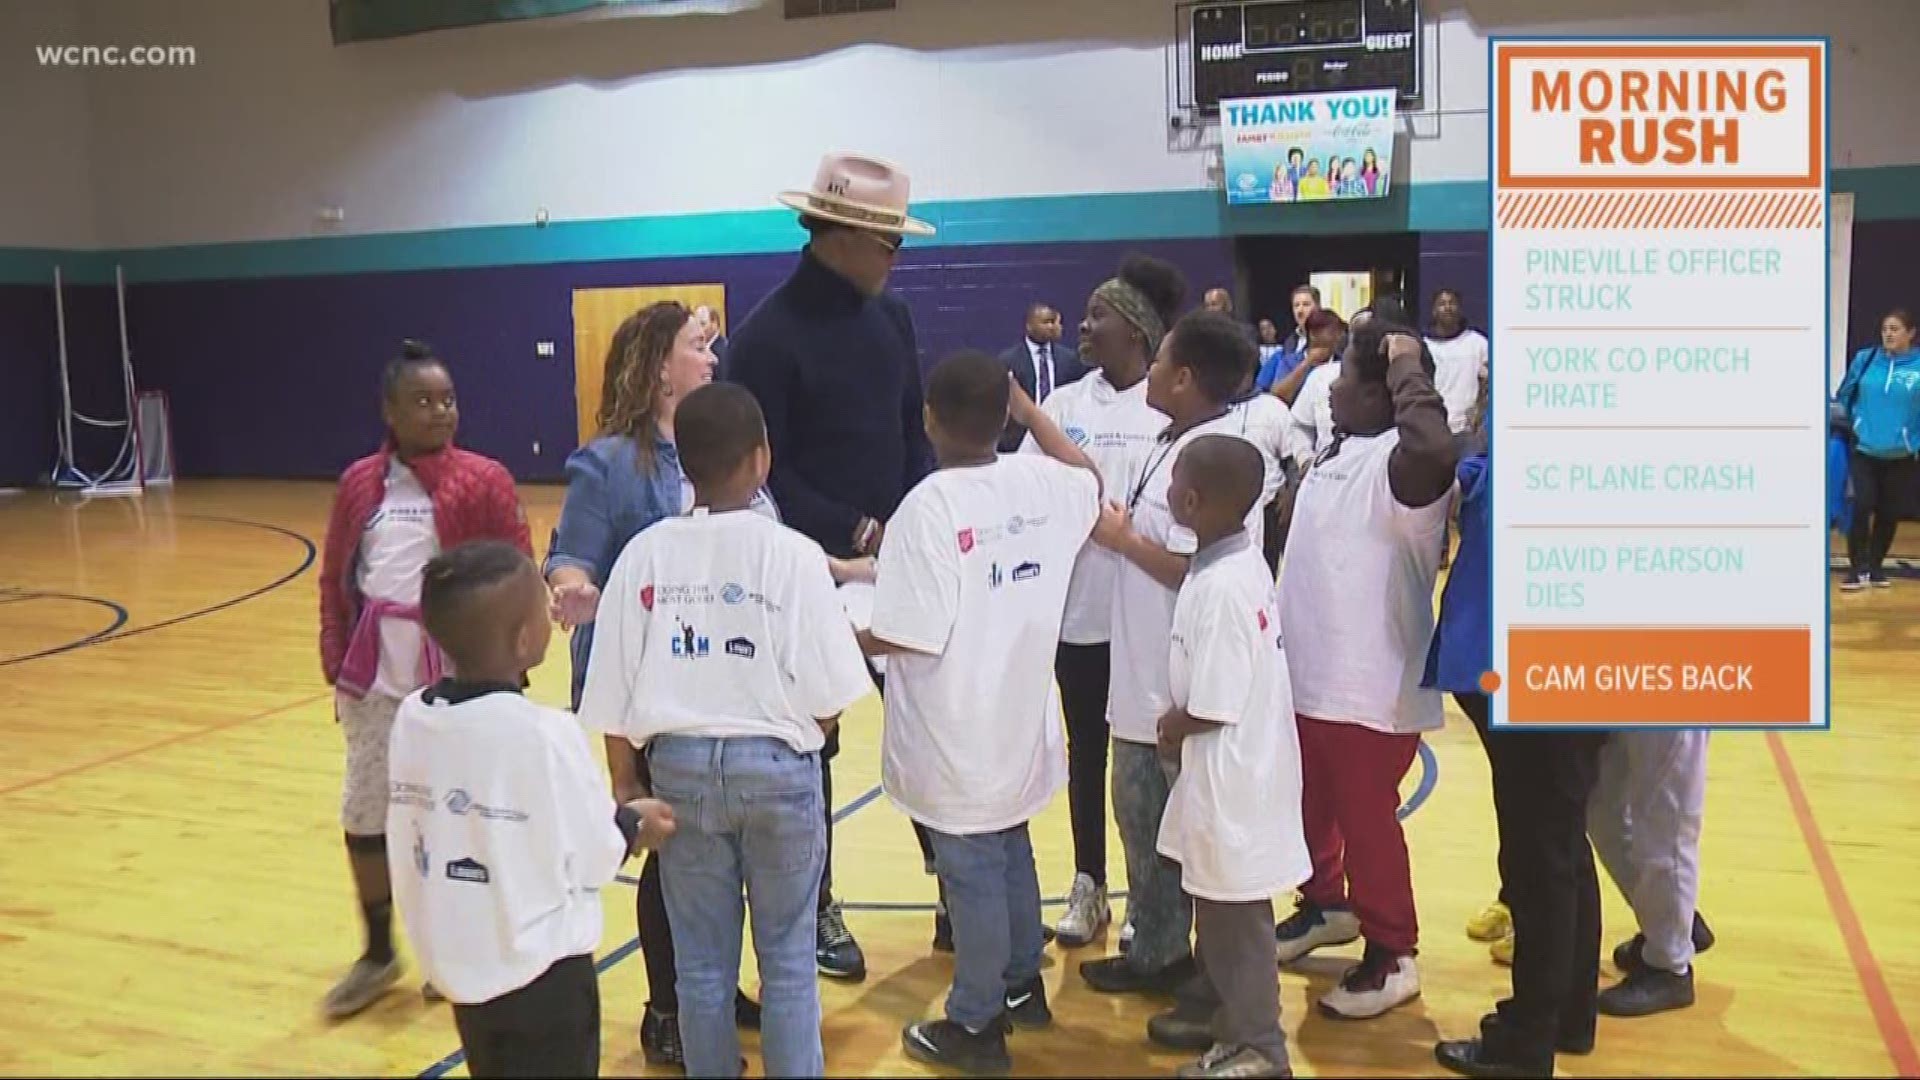 Cam Newton paid a visit to the Boys & Girls Club of Charlotte after his foundation helped make renovations to several Charlotte-area facilities.